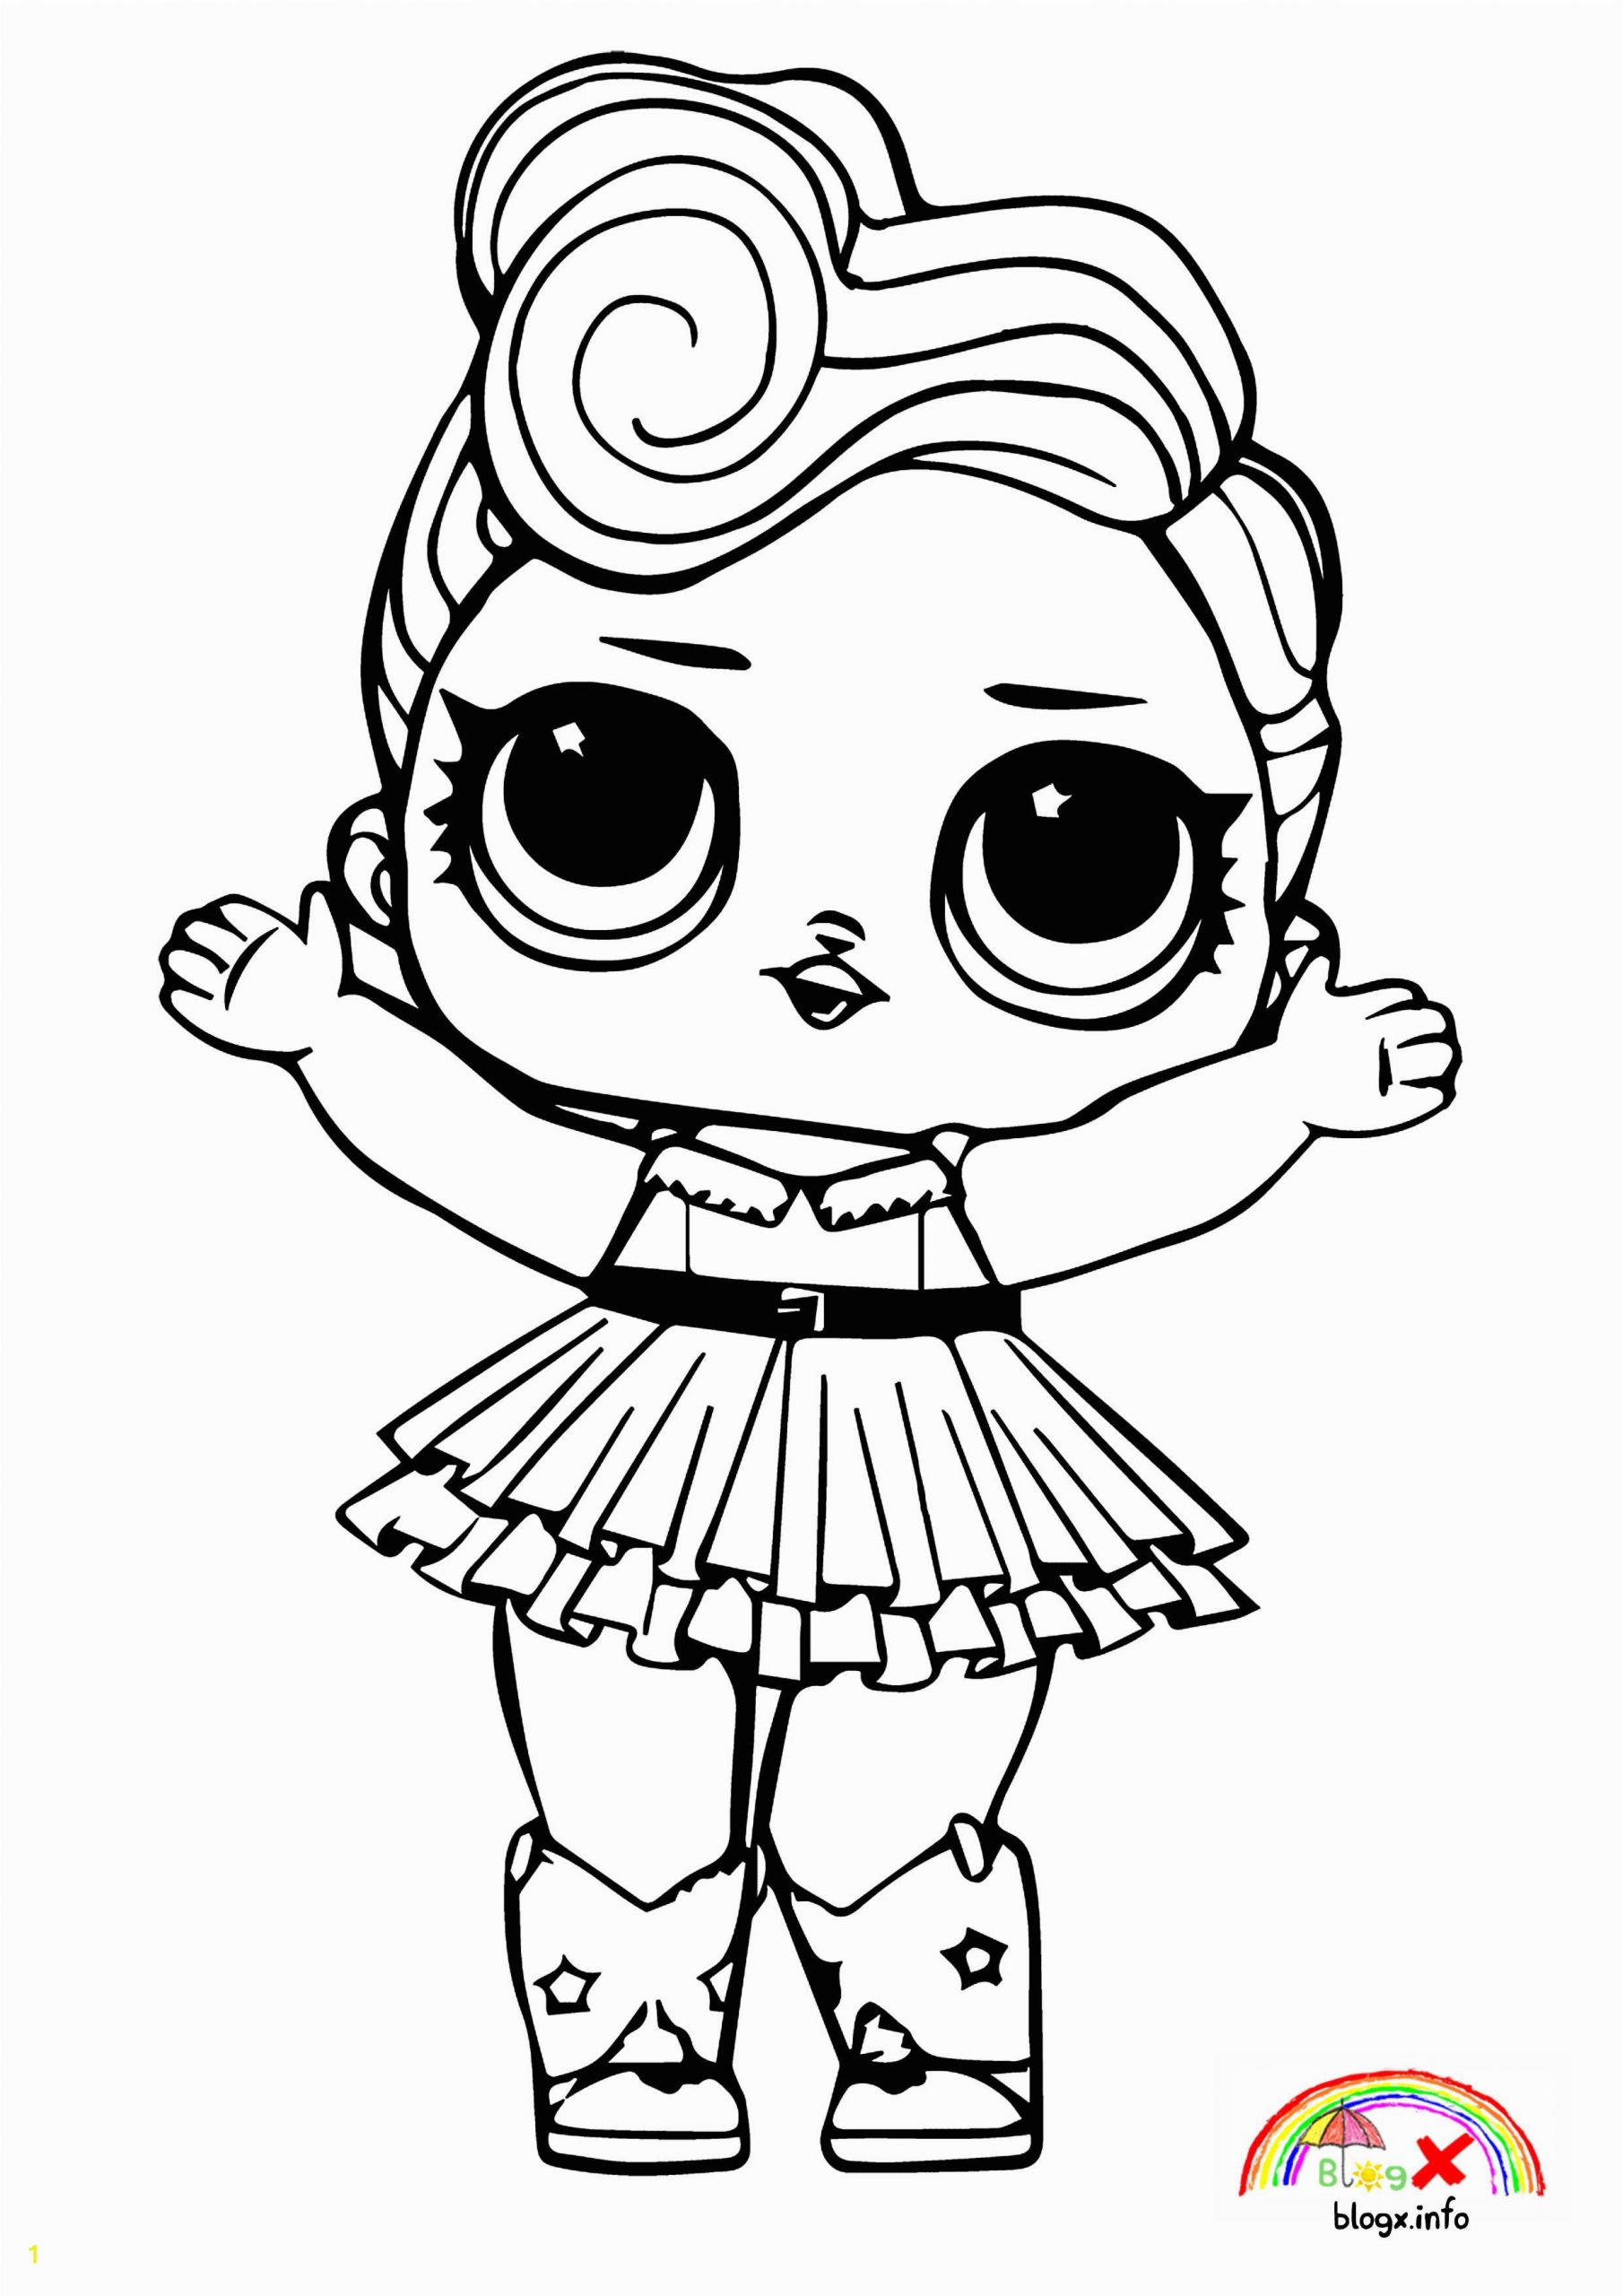 Free Coloring Pages Lol Dolls Lol Surprise Dolls Coloring Book Hd